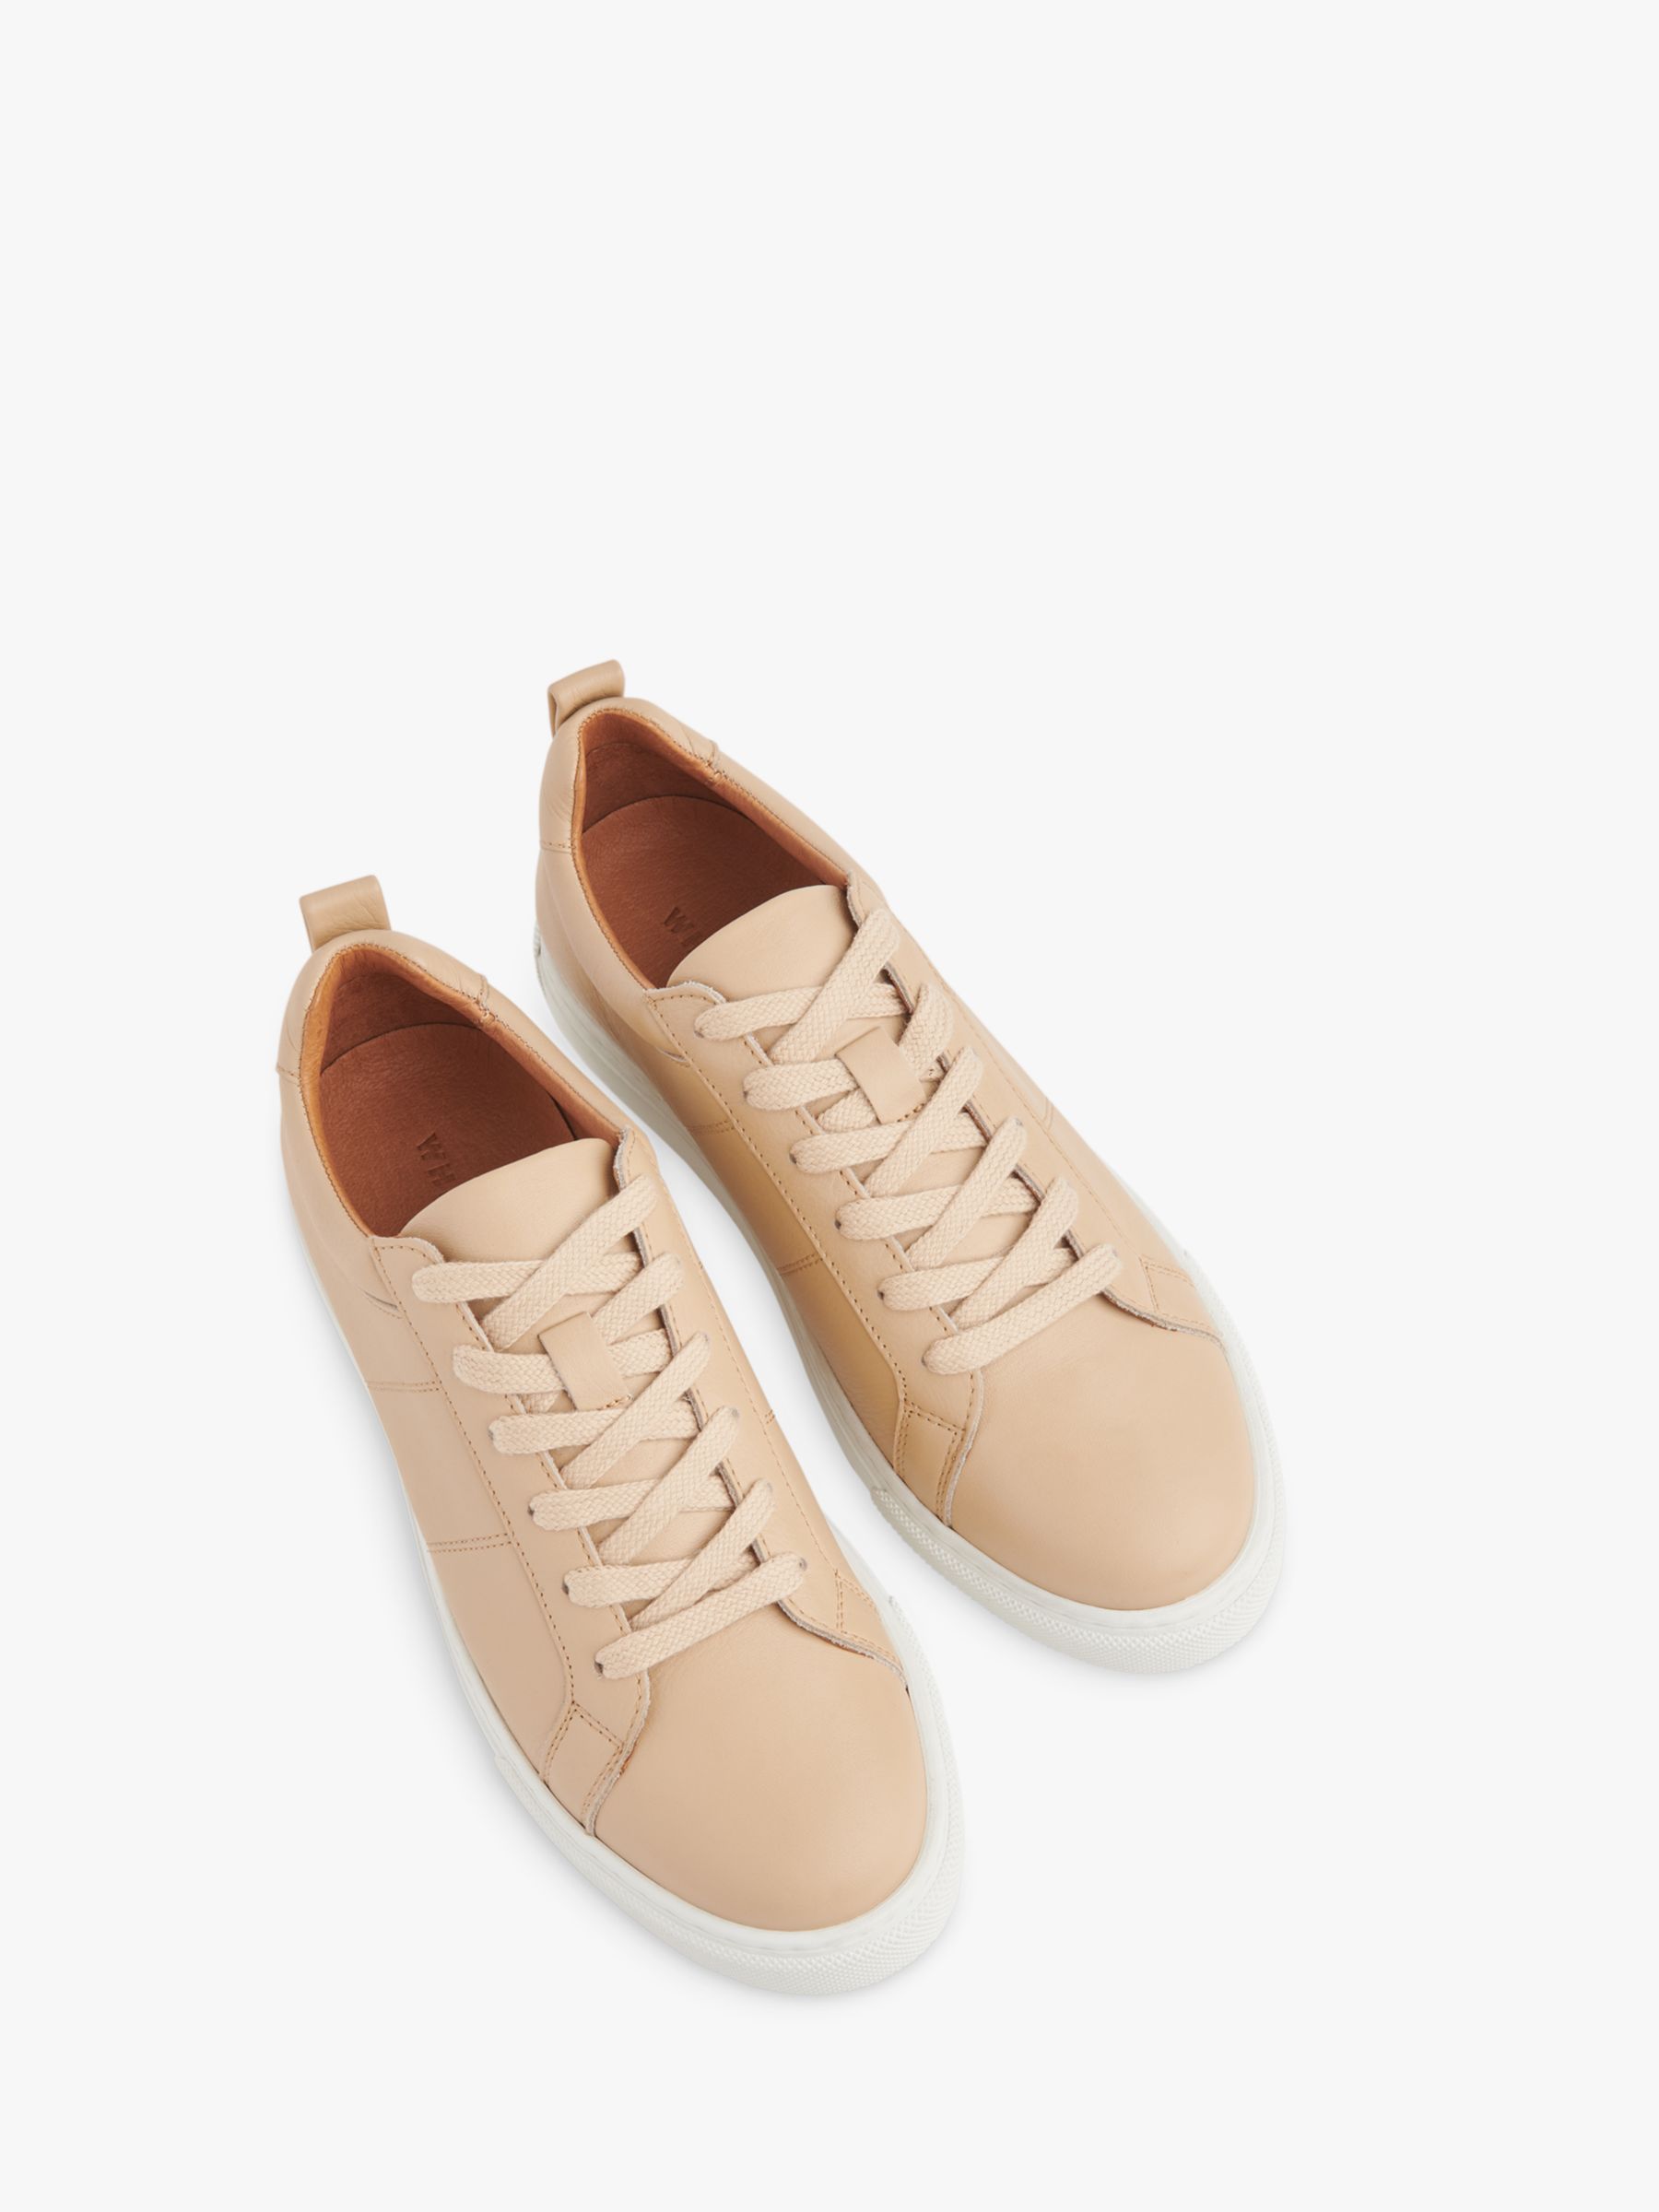 Buy Whistles Koki Lace Up Low Top Leather Trainers Online at johnlewis.com